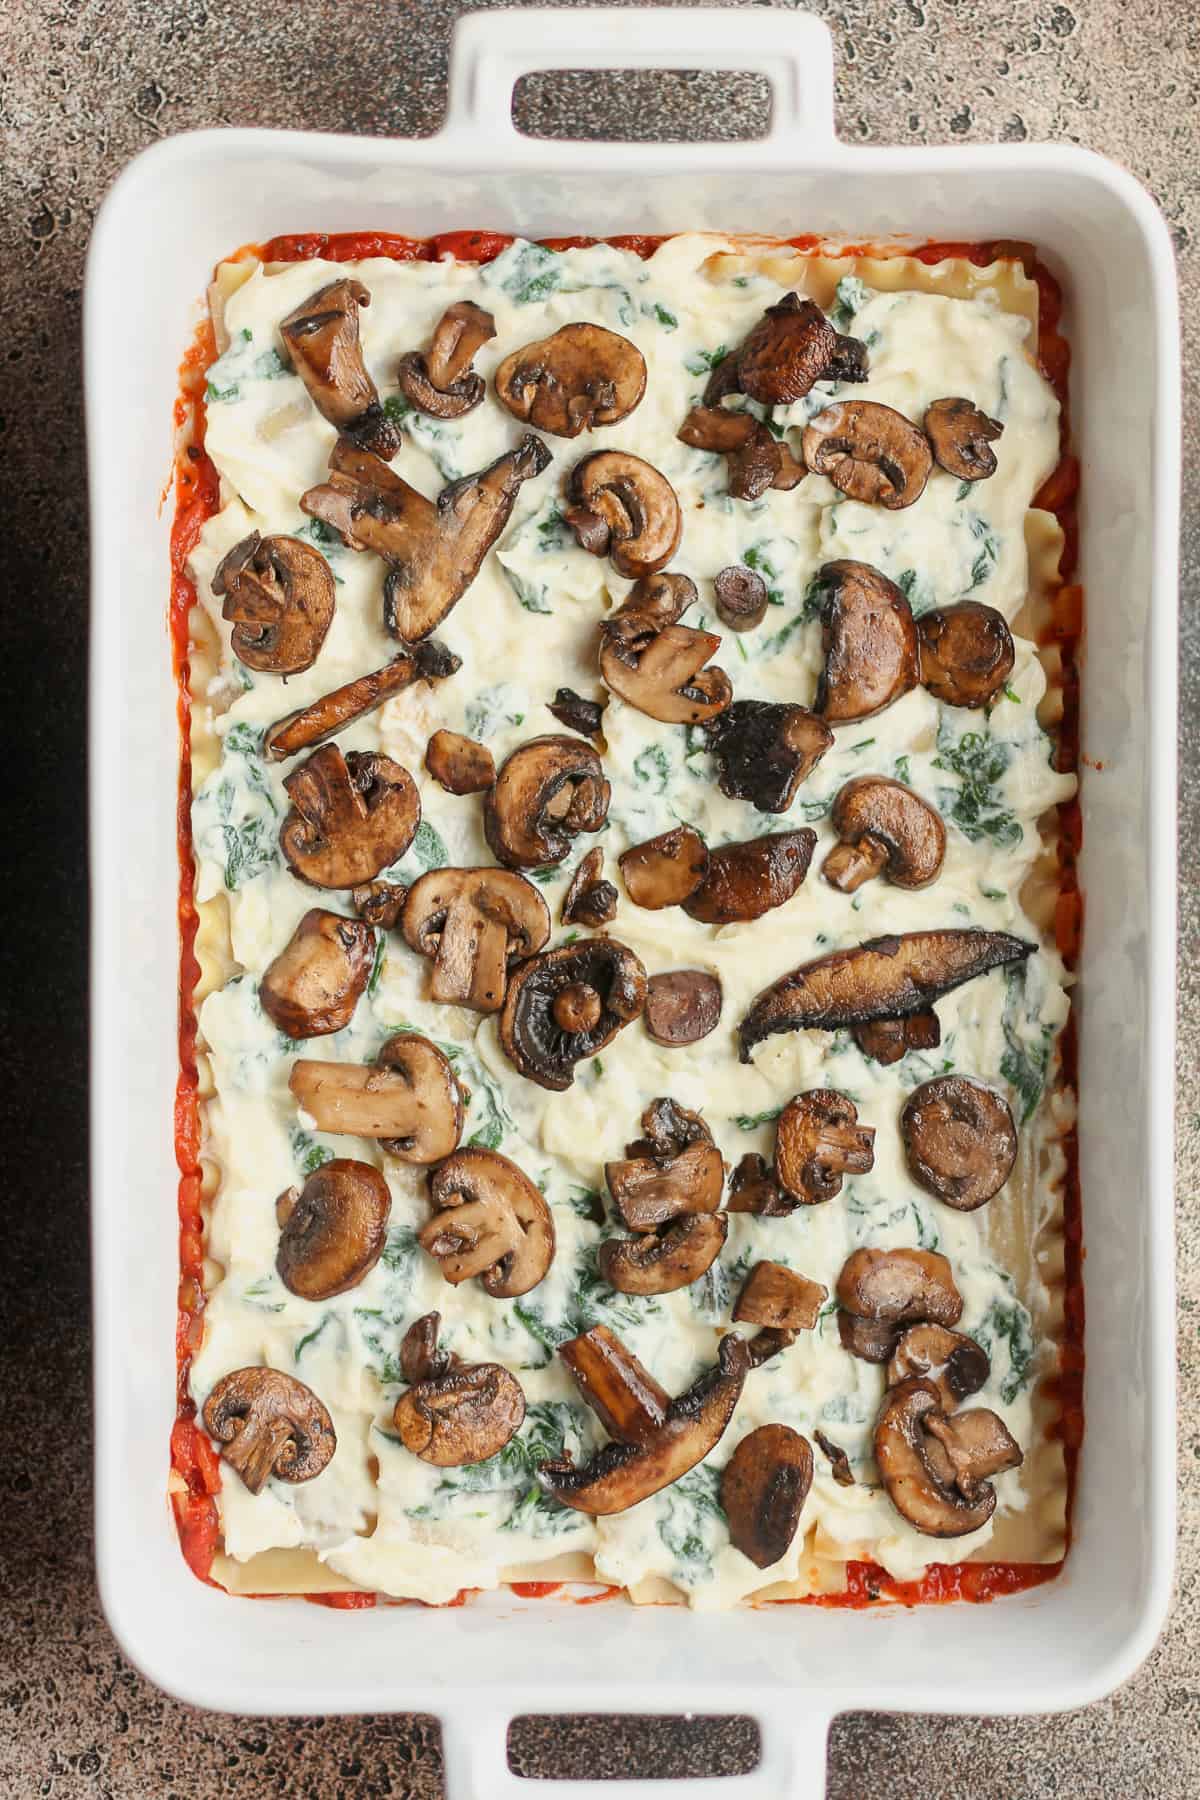 The layers with mushrooms on top.